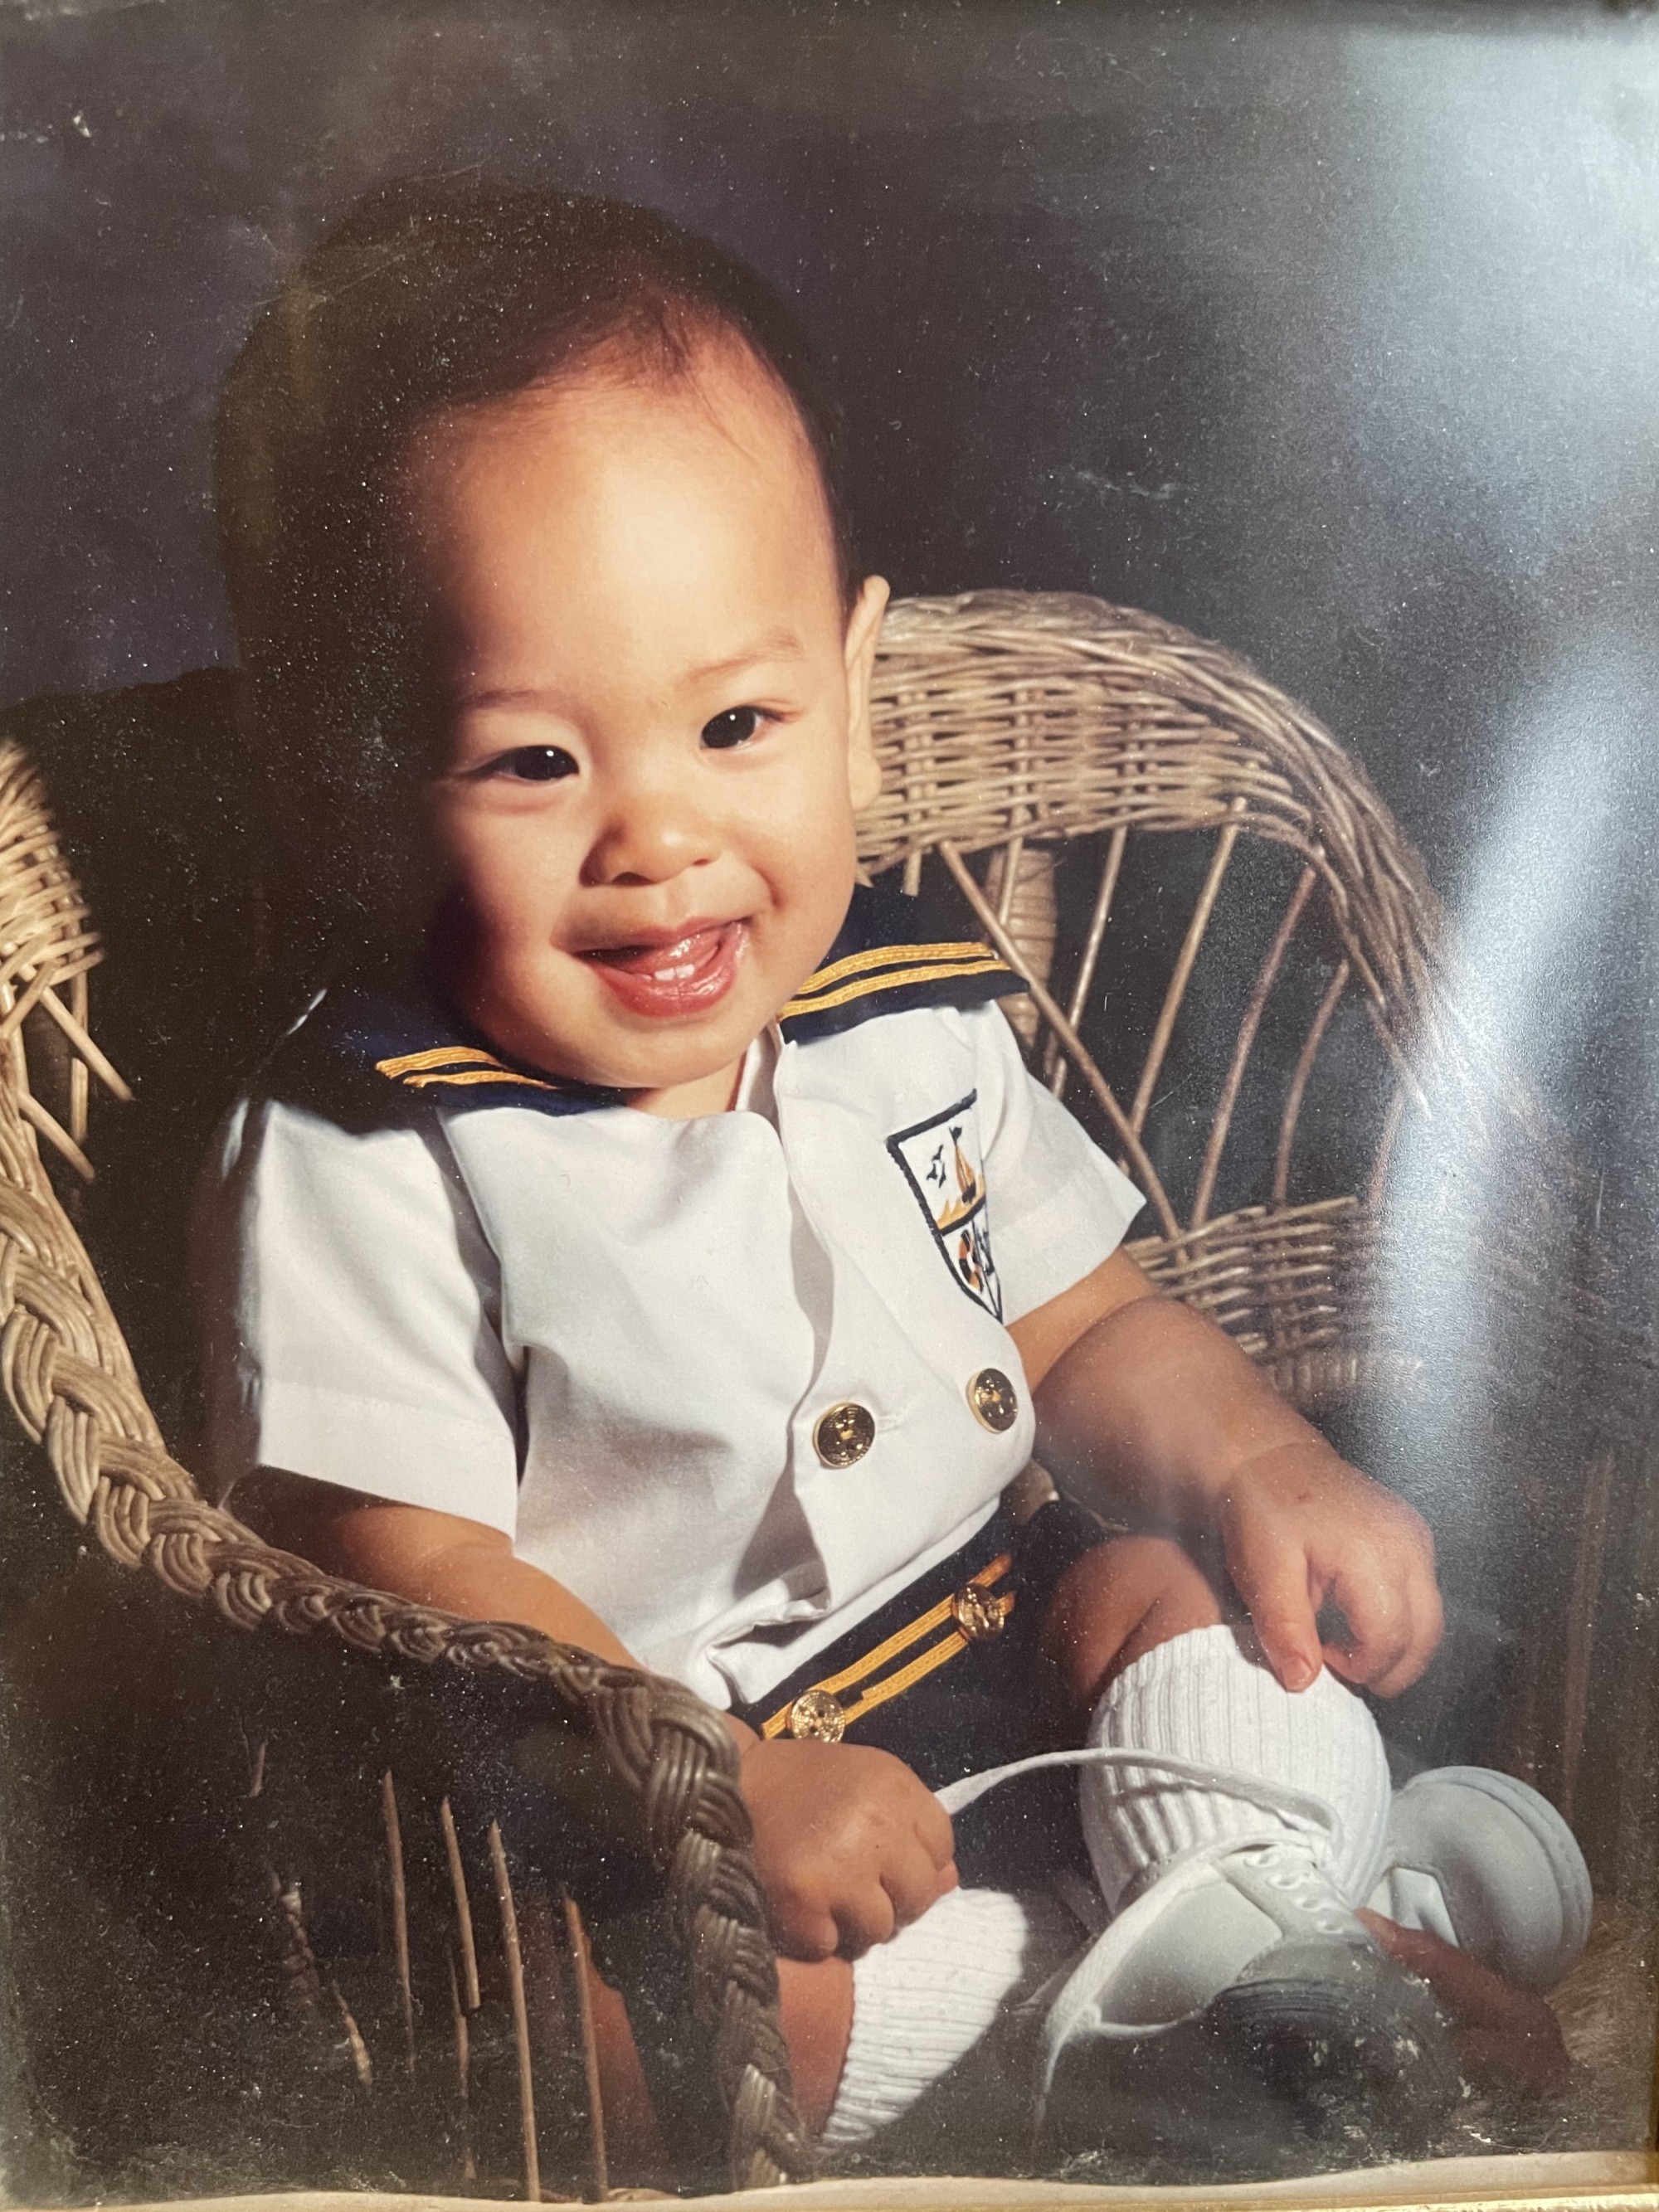 Cean, a Filipino baby with a sailor outfit and black hair, is sitting in a wicker chair with a grainy photobooth backdrop.